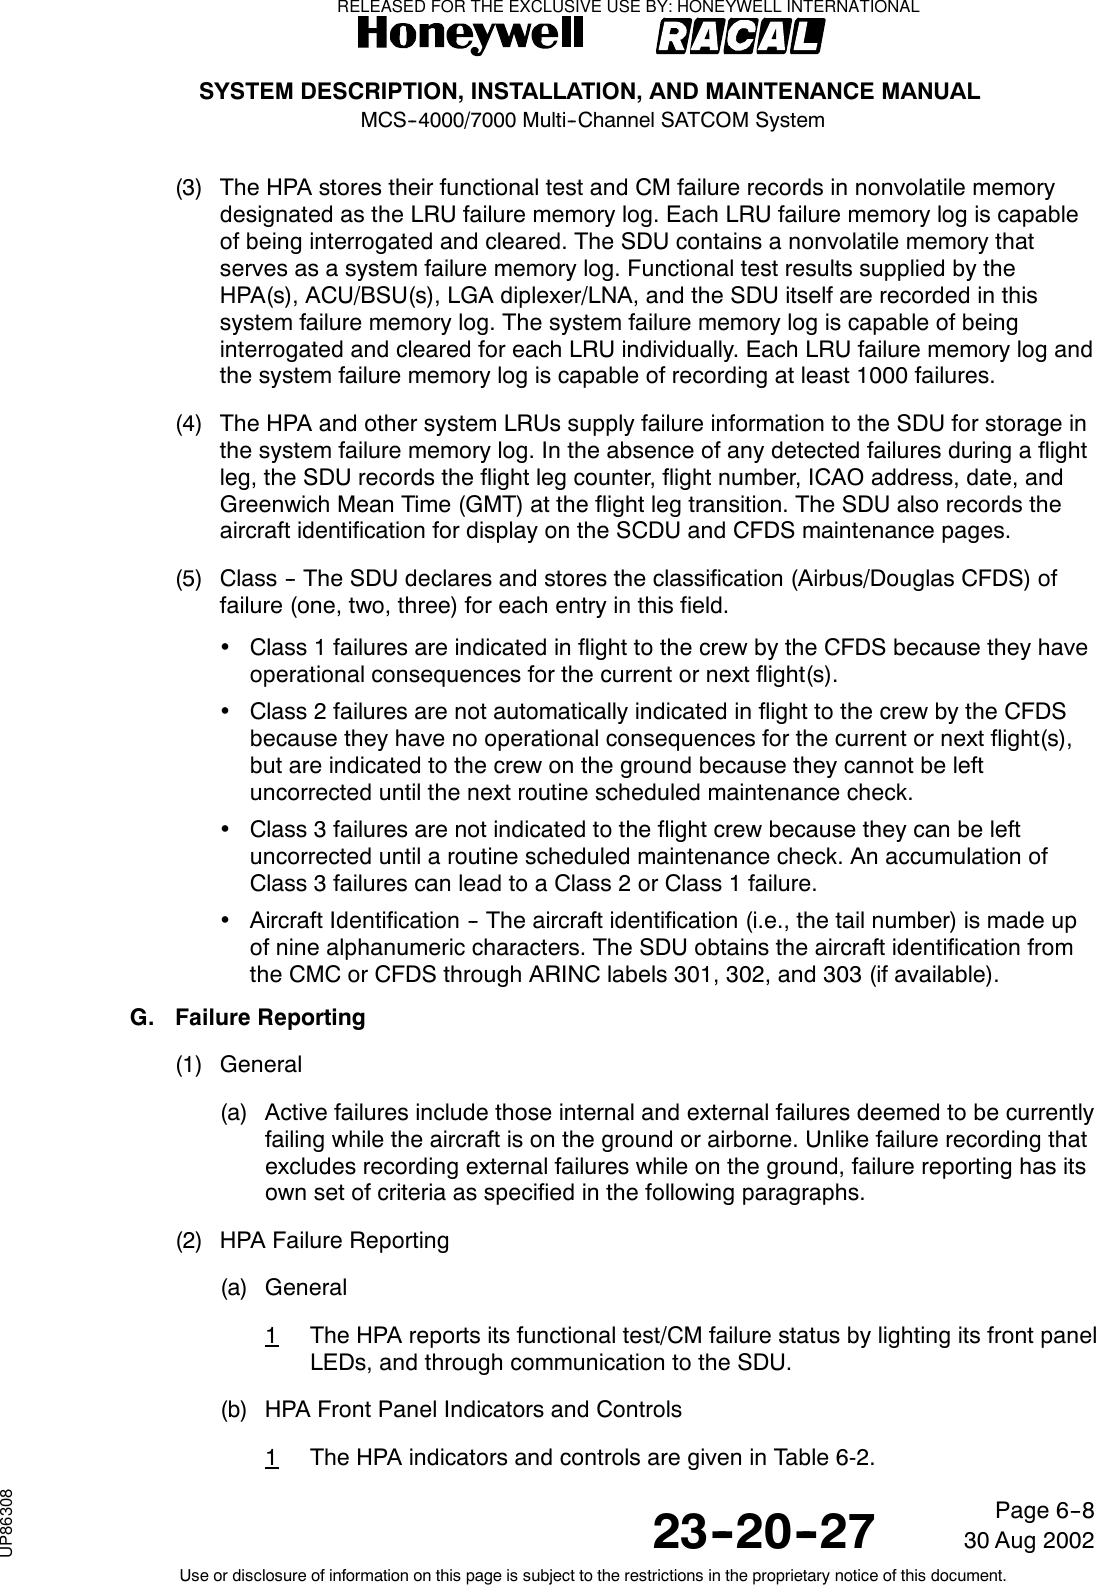 SYSTEM DESCRIPTION, INSTALLATION, AND MAINTENANCE MANUALMCS--4000/7000 Multi--Channel SATCOM System23--20--2730 Aug 2002Use or disclosure of information on this page is subject to the restrictions in the proprietary notice of this document.Page 6--8(3) The HPA stores their functional test and CM failure records in nonvolatile memorydesignated as the LRU failure memory log. Each LRU failure memory log is capableof being interrogated and cleared. The SDU contains a nonvolatile memory thatserves as a system failure memory log. Functional test results supplied by theHPA(s), ACU/BSU(s), LGA diplexer/LNA, and the SDU itself are recorded in thissystem failure memory log. The system failure memory log is capable of beinginterrogated and cleared for each LRU individually. Each LRU failure memory log andthe system failure memory log is capable of recording at least 1000 failures.(4) The HPA and other system LRUs supply failure information to the SDU for storage inthe system failure memory log. In the absence of any detected failures during a flightleg, the SDU records the flight leg counter, flight number, ICAO address, date, andGreenwich Mean Time (GMT) at the flight leg transition. The SDU also records theaircraft identification for display on the SCDU and CFDS maintenance pages.(5) Class -- The SDU declares and stores the classification (Airbus/Douglas CFDS) offailure (one, two, three) for each entry in this field.•Class 1 failures are indicated in flight to the crew by the CFDS because they haveoperational consequences for the current or next flight(s).•Class 2 failures are not automatically indicated in flight to the crew by the CFDSbecause they have no operational consequences for the current or next flight(s),but are indicated to the crew on the ground because they cannot be leftuncorrected until the next routine scheduled maintenance check.•Class 3 failures are not indicated to the flight crew because they can be leftuncorrected until a routine scheduled maintenance check. An accumulation ofClass 3 failures can lead to a Class 2 or Class 1 failure.•Aircraft Identification -- The aircraft identification (i.e., the tail number) is made upof nine alphanumeric characters. The SDU obtains the aircraft identification fromthe CMC or CFDS through ARINC labels 301, 302, and 303 (if available).G. Failure Reporting(1) General(a) Active failures include those internal and external failures deemed to be currentlyfailing while the aircraft is on the ground or airborne. Unlike failure recording thatexcludes recording external failures while on the ground, failure reporting has itsown set of criteria as specified in the following paragraphs.(2) HPA Failure Reporting(a) General1The HPA reports its functional test/CM failure status by lighting its front panelLEDs, and through communication to the SDU.(b) HPA Front Panel Indicators and Controls1The HPA indicators and controls are given in Table 6-2.RELEASED FOR THE EXCLUSIVE USE BY: HONEYWELL INTERNATIONALUP86308